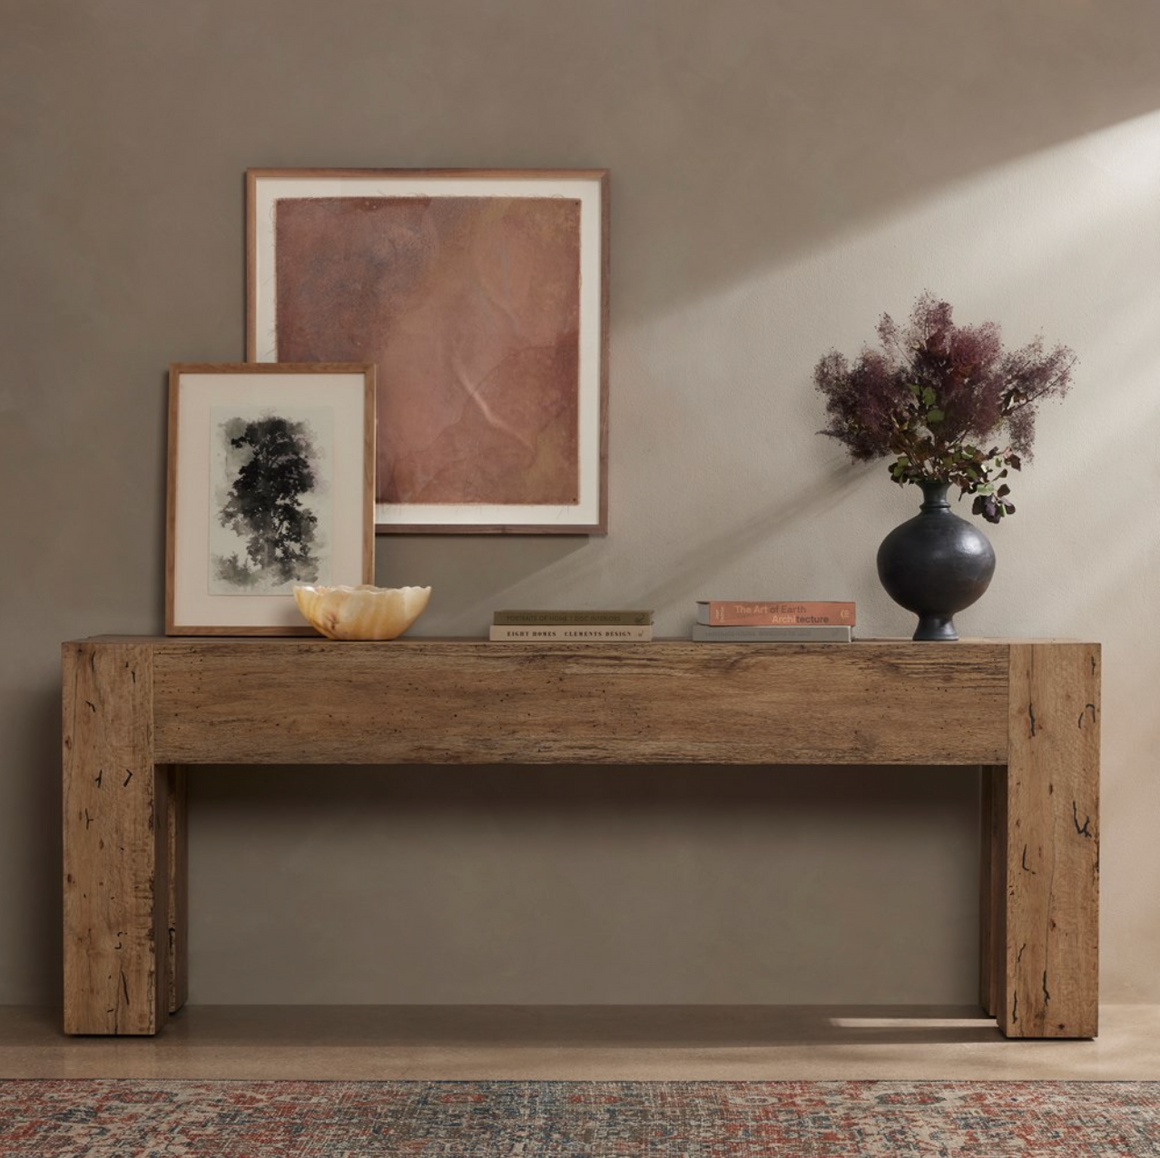 Remy 86" Console Table - Rustic Wormwood Oak